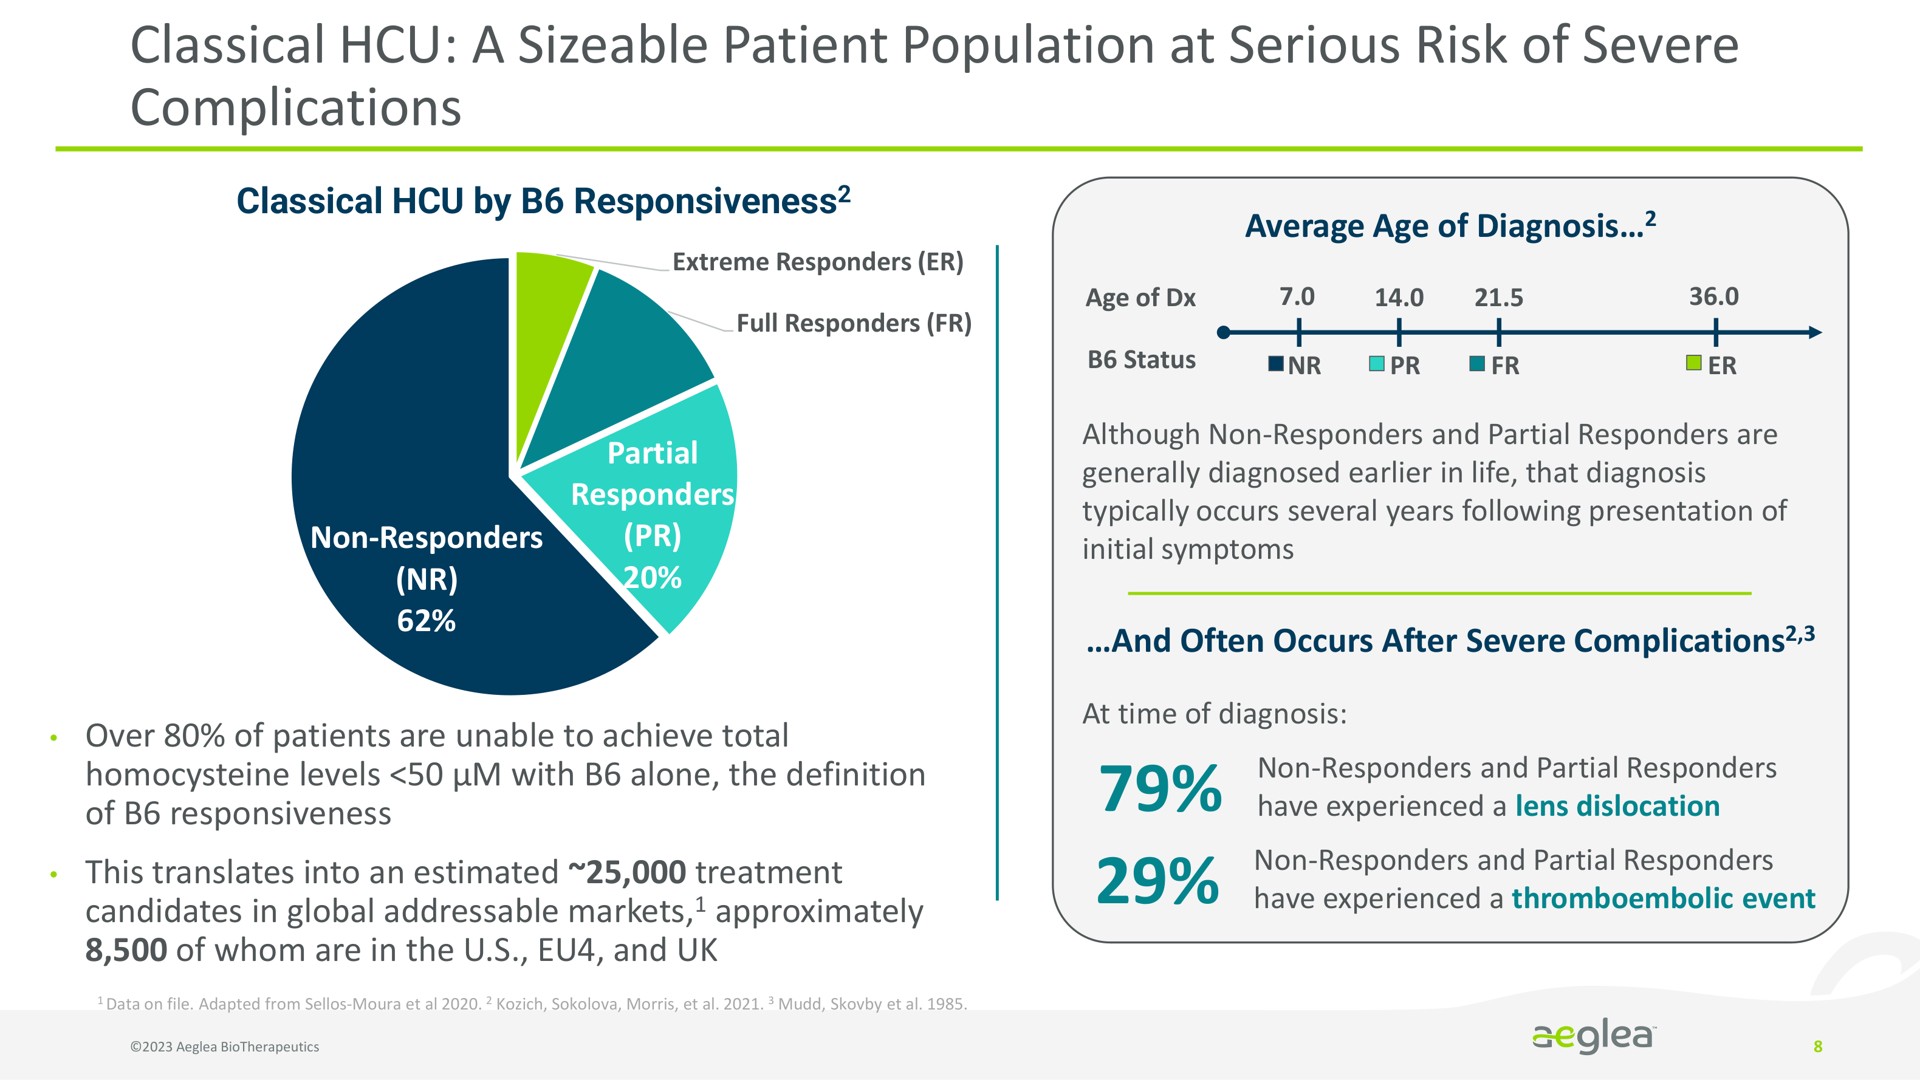 classical a sizeable patient population at serious risk of severe complications | Aeglea BioTherapeutics